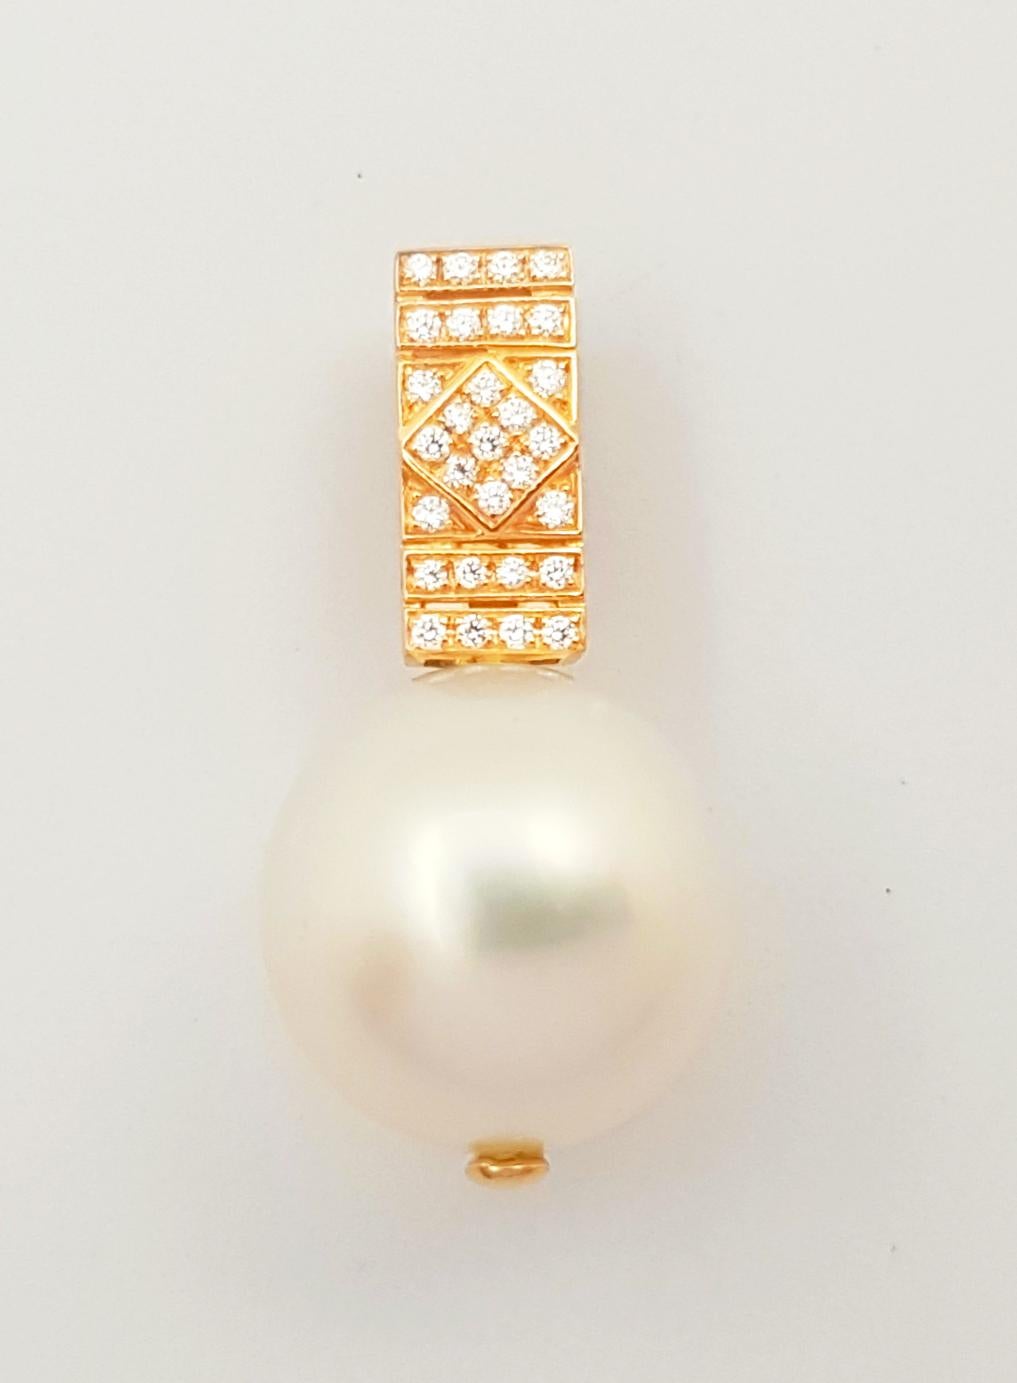 South Sea Pearl with Diamond 0.08 carat Pendant set in 18K Rose Gold Settings
(chain not included)

Width: 1.2 cm 
Length: 2.4 cm
Total Weight: 3.54 grams

South Sea Pearl Approximately: 12 mm

